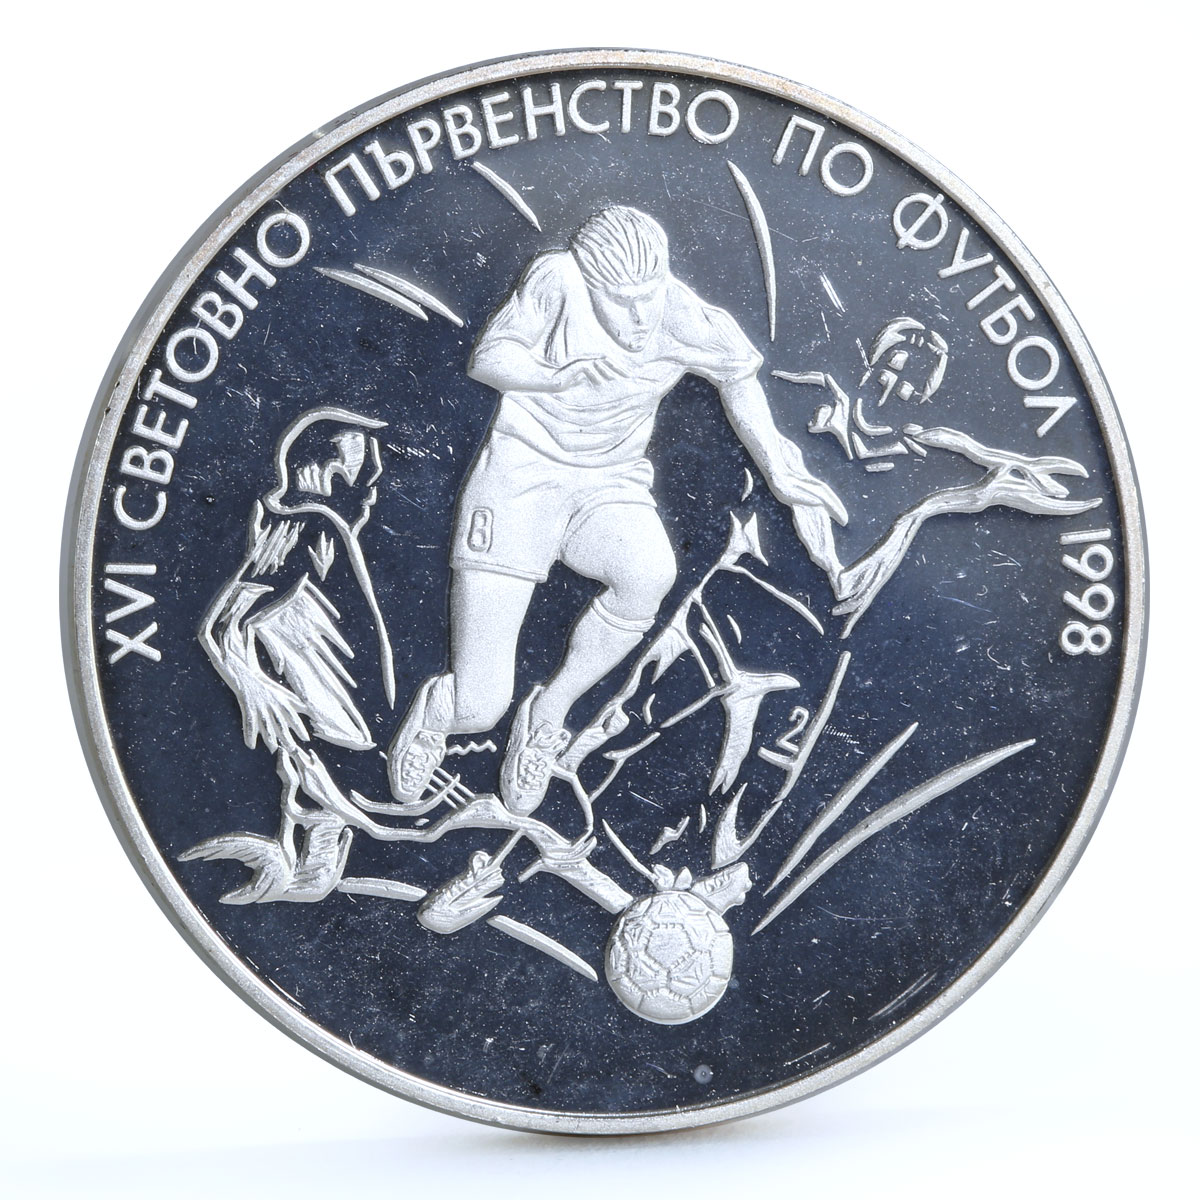 Bulgaria 1000 leva Football World Cup in France Players proof silver coin 1997